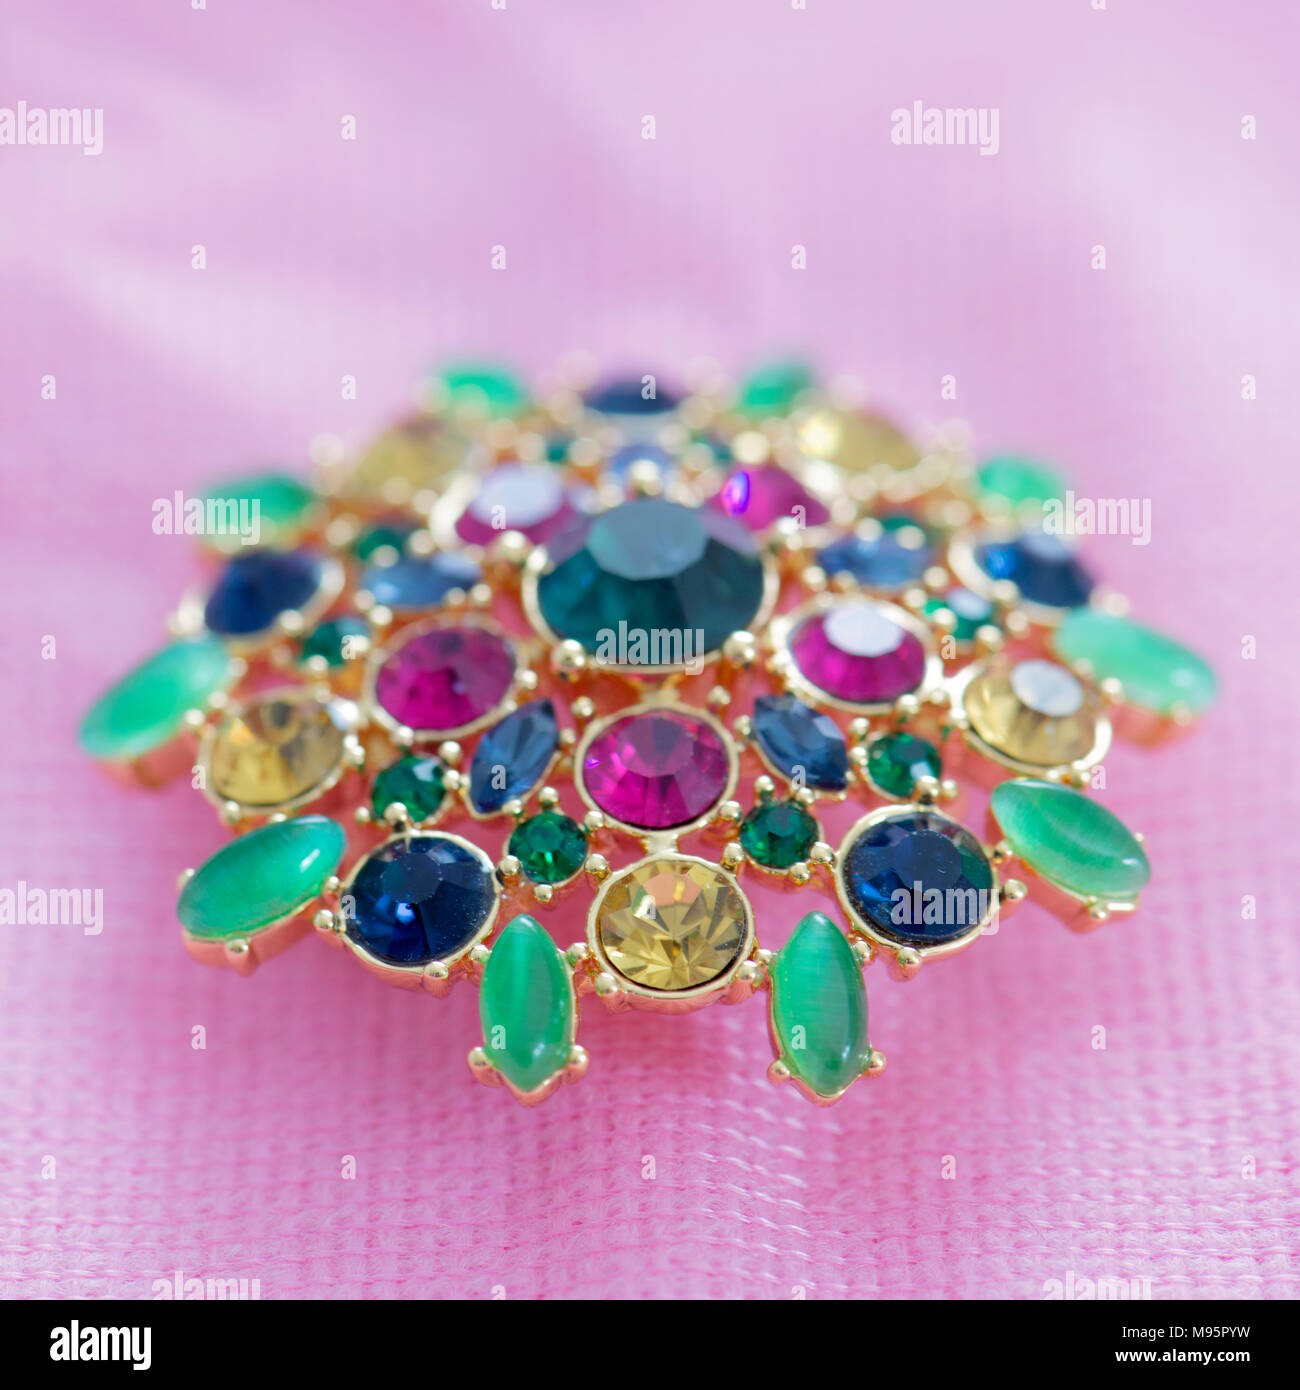 Colorful stones on a brooch Stock Photo